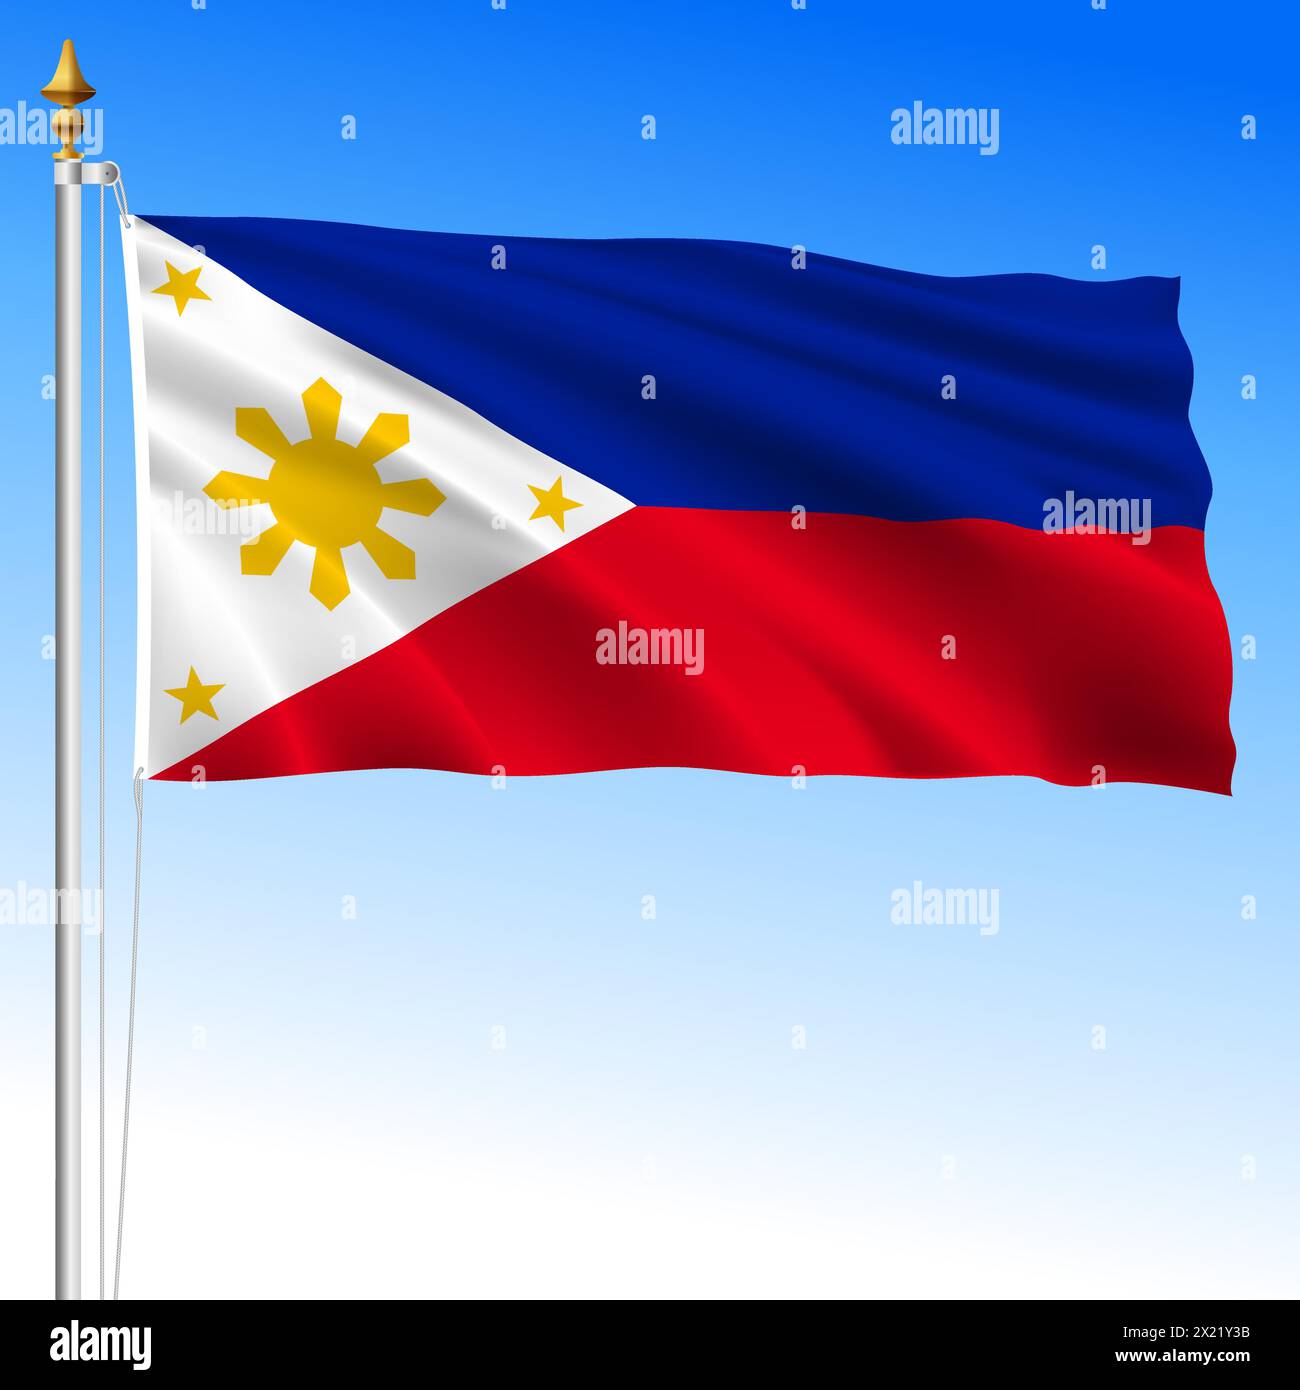 Philippines, official national waving flag, asiatic country, vector illustration Stock Vector